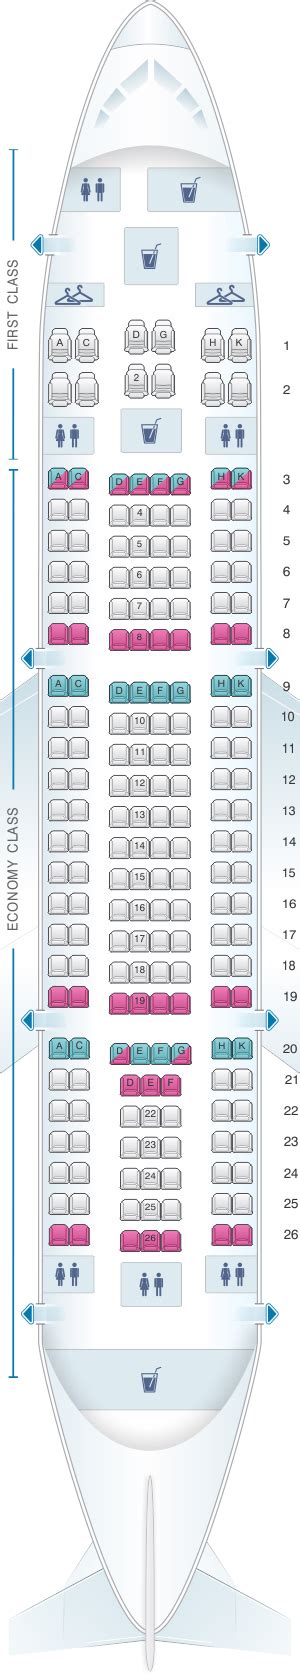 A310 Seat Map